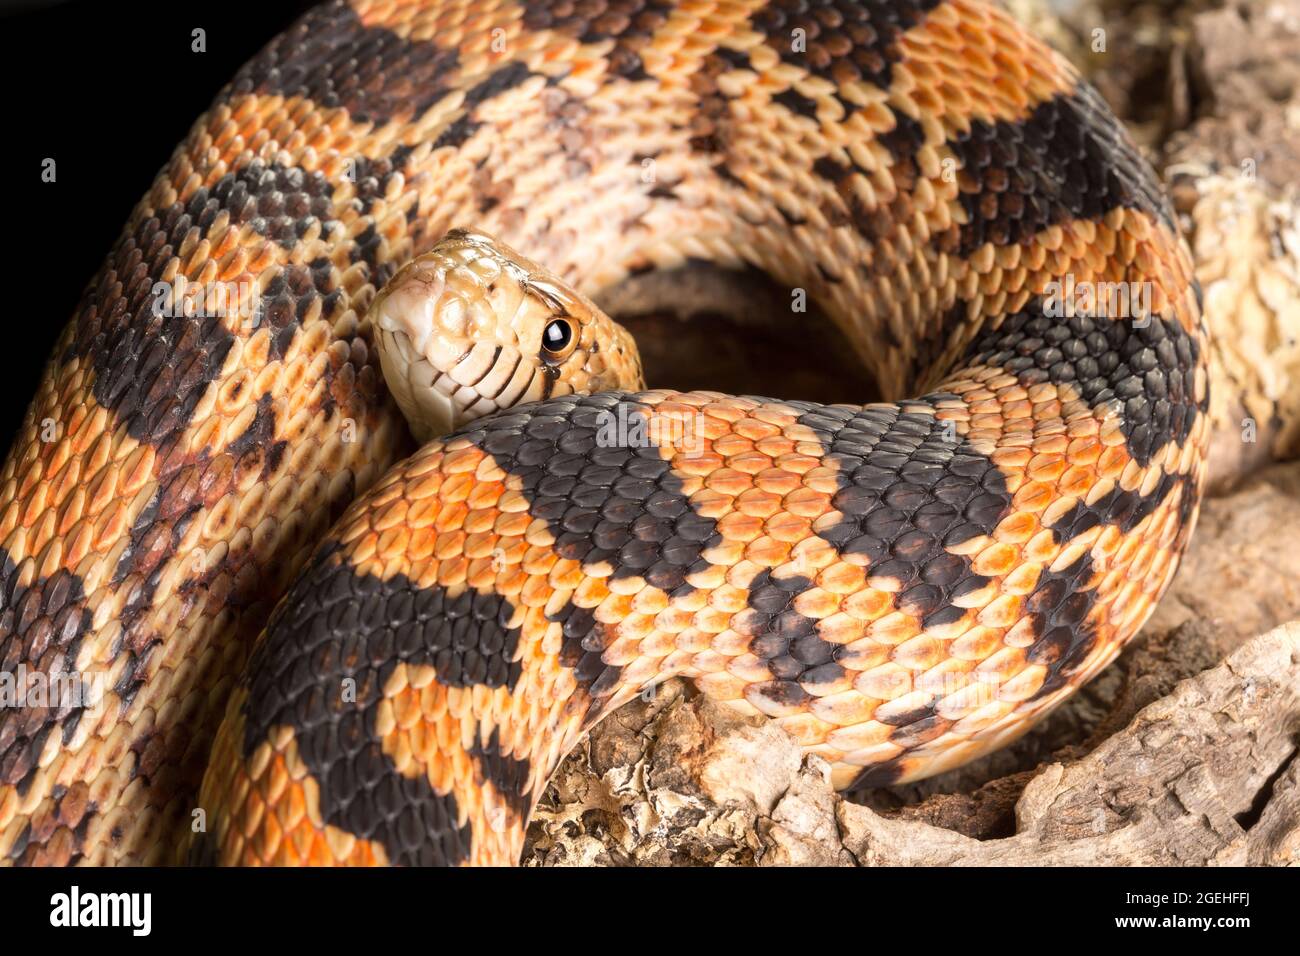 Adult bullsnake showing its body and head Stock Photo